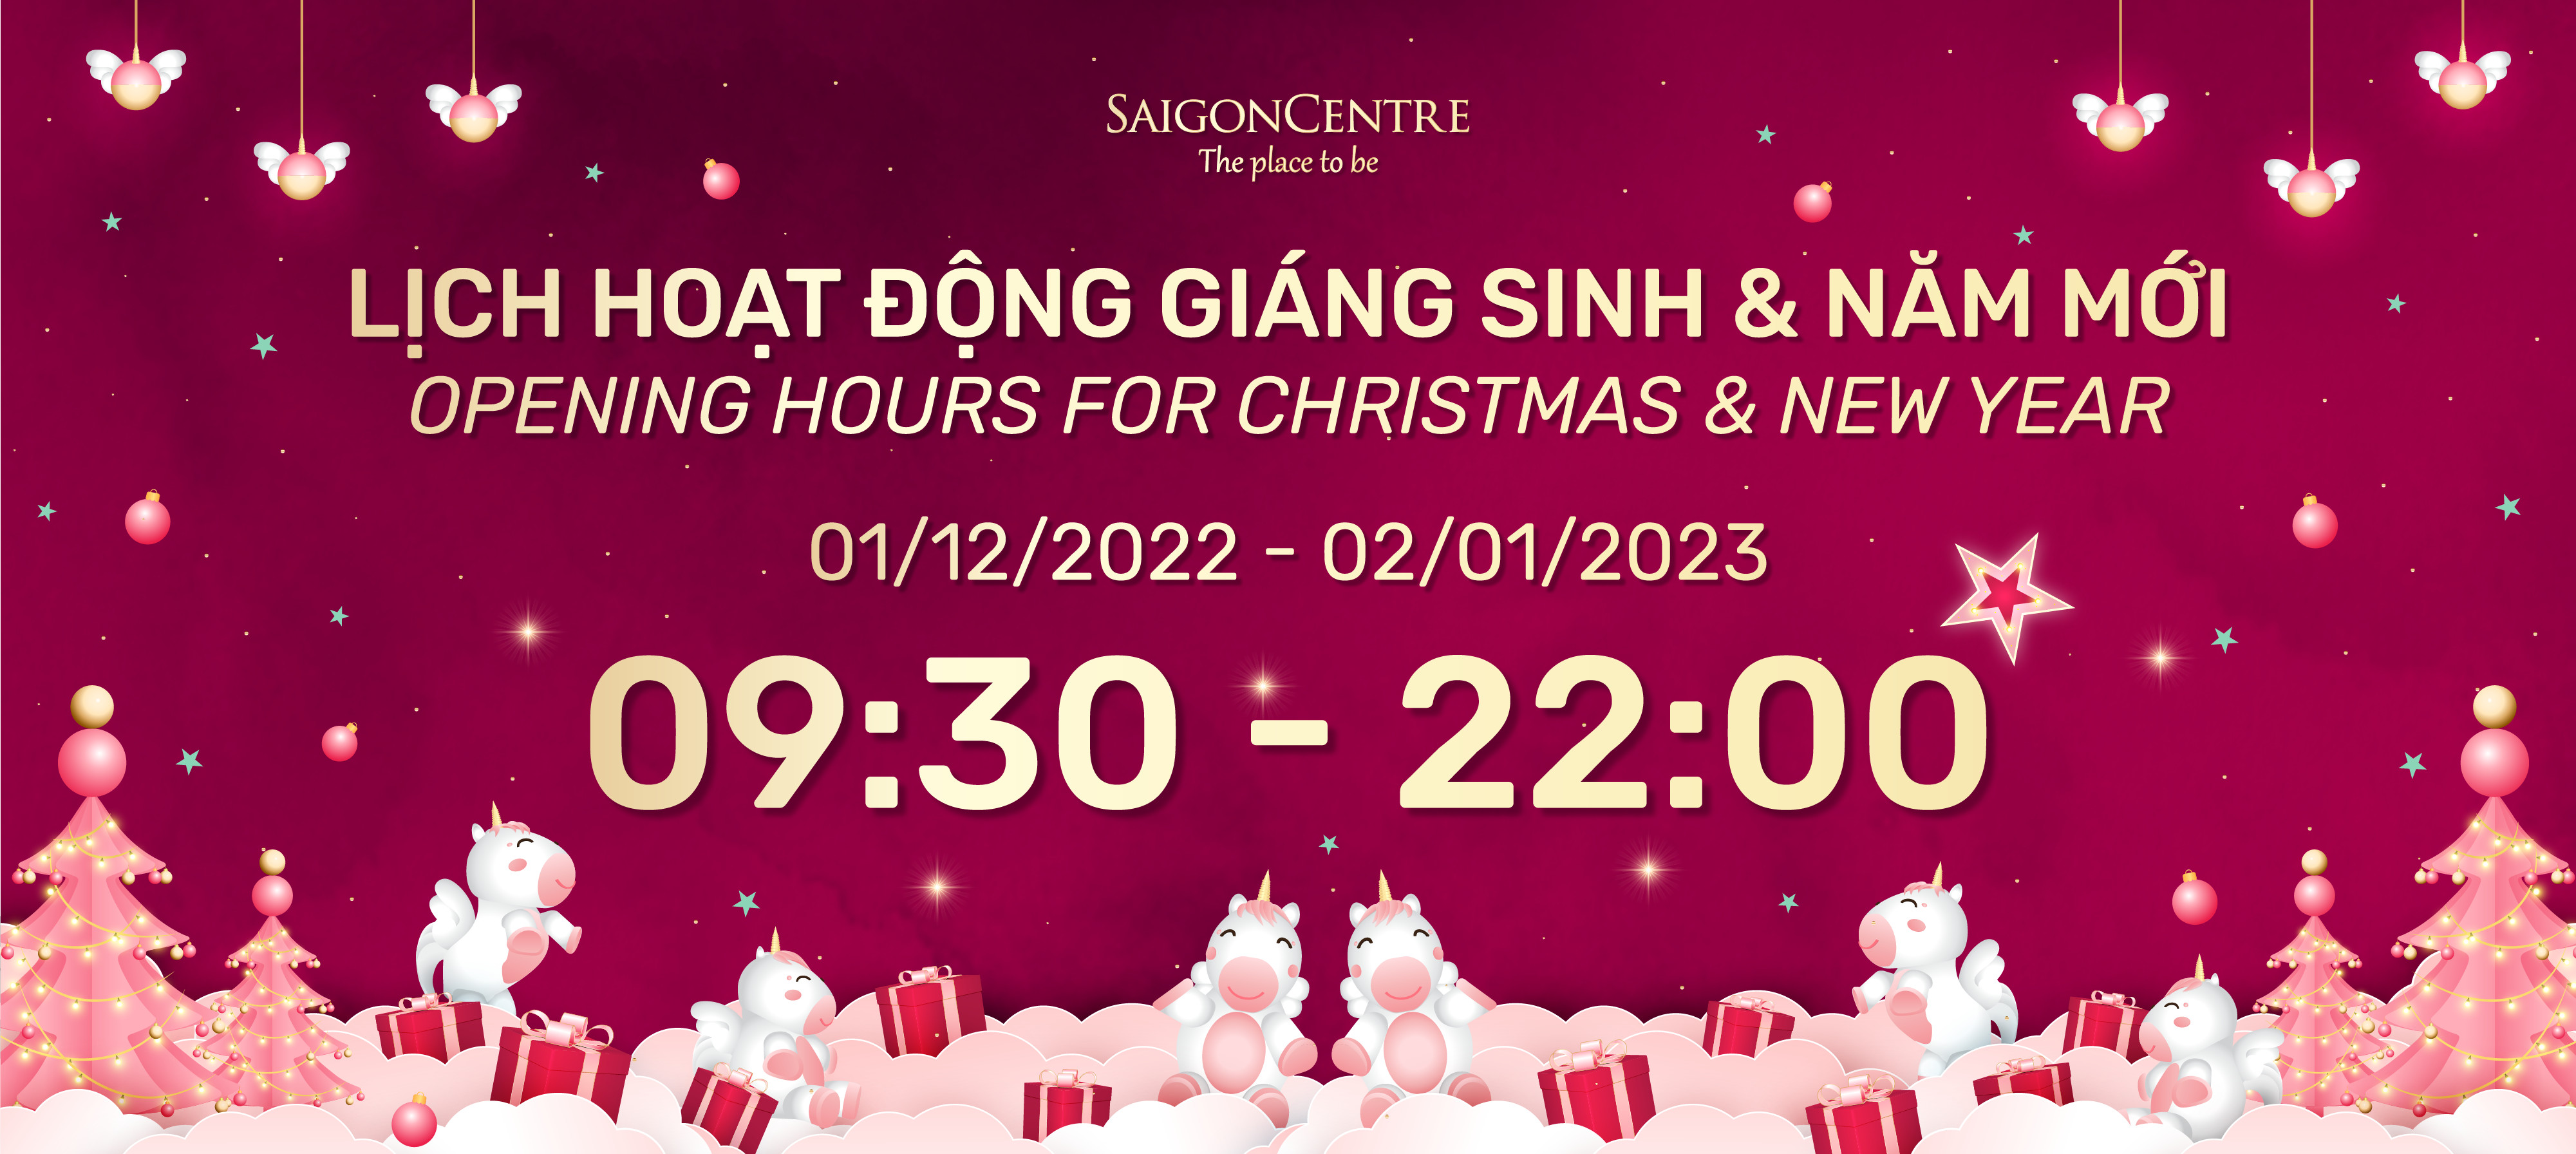 XMAS 2022 & NEW YEAR 2023 OPERATING HOURS